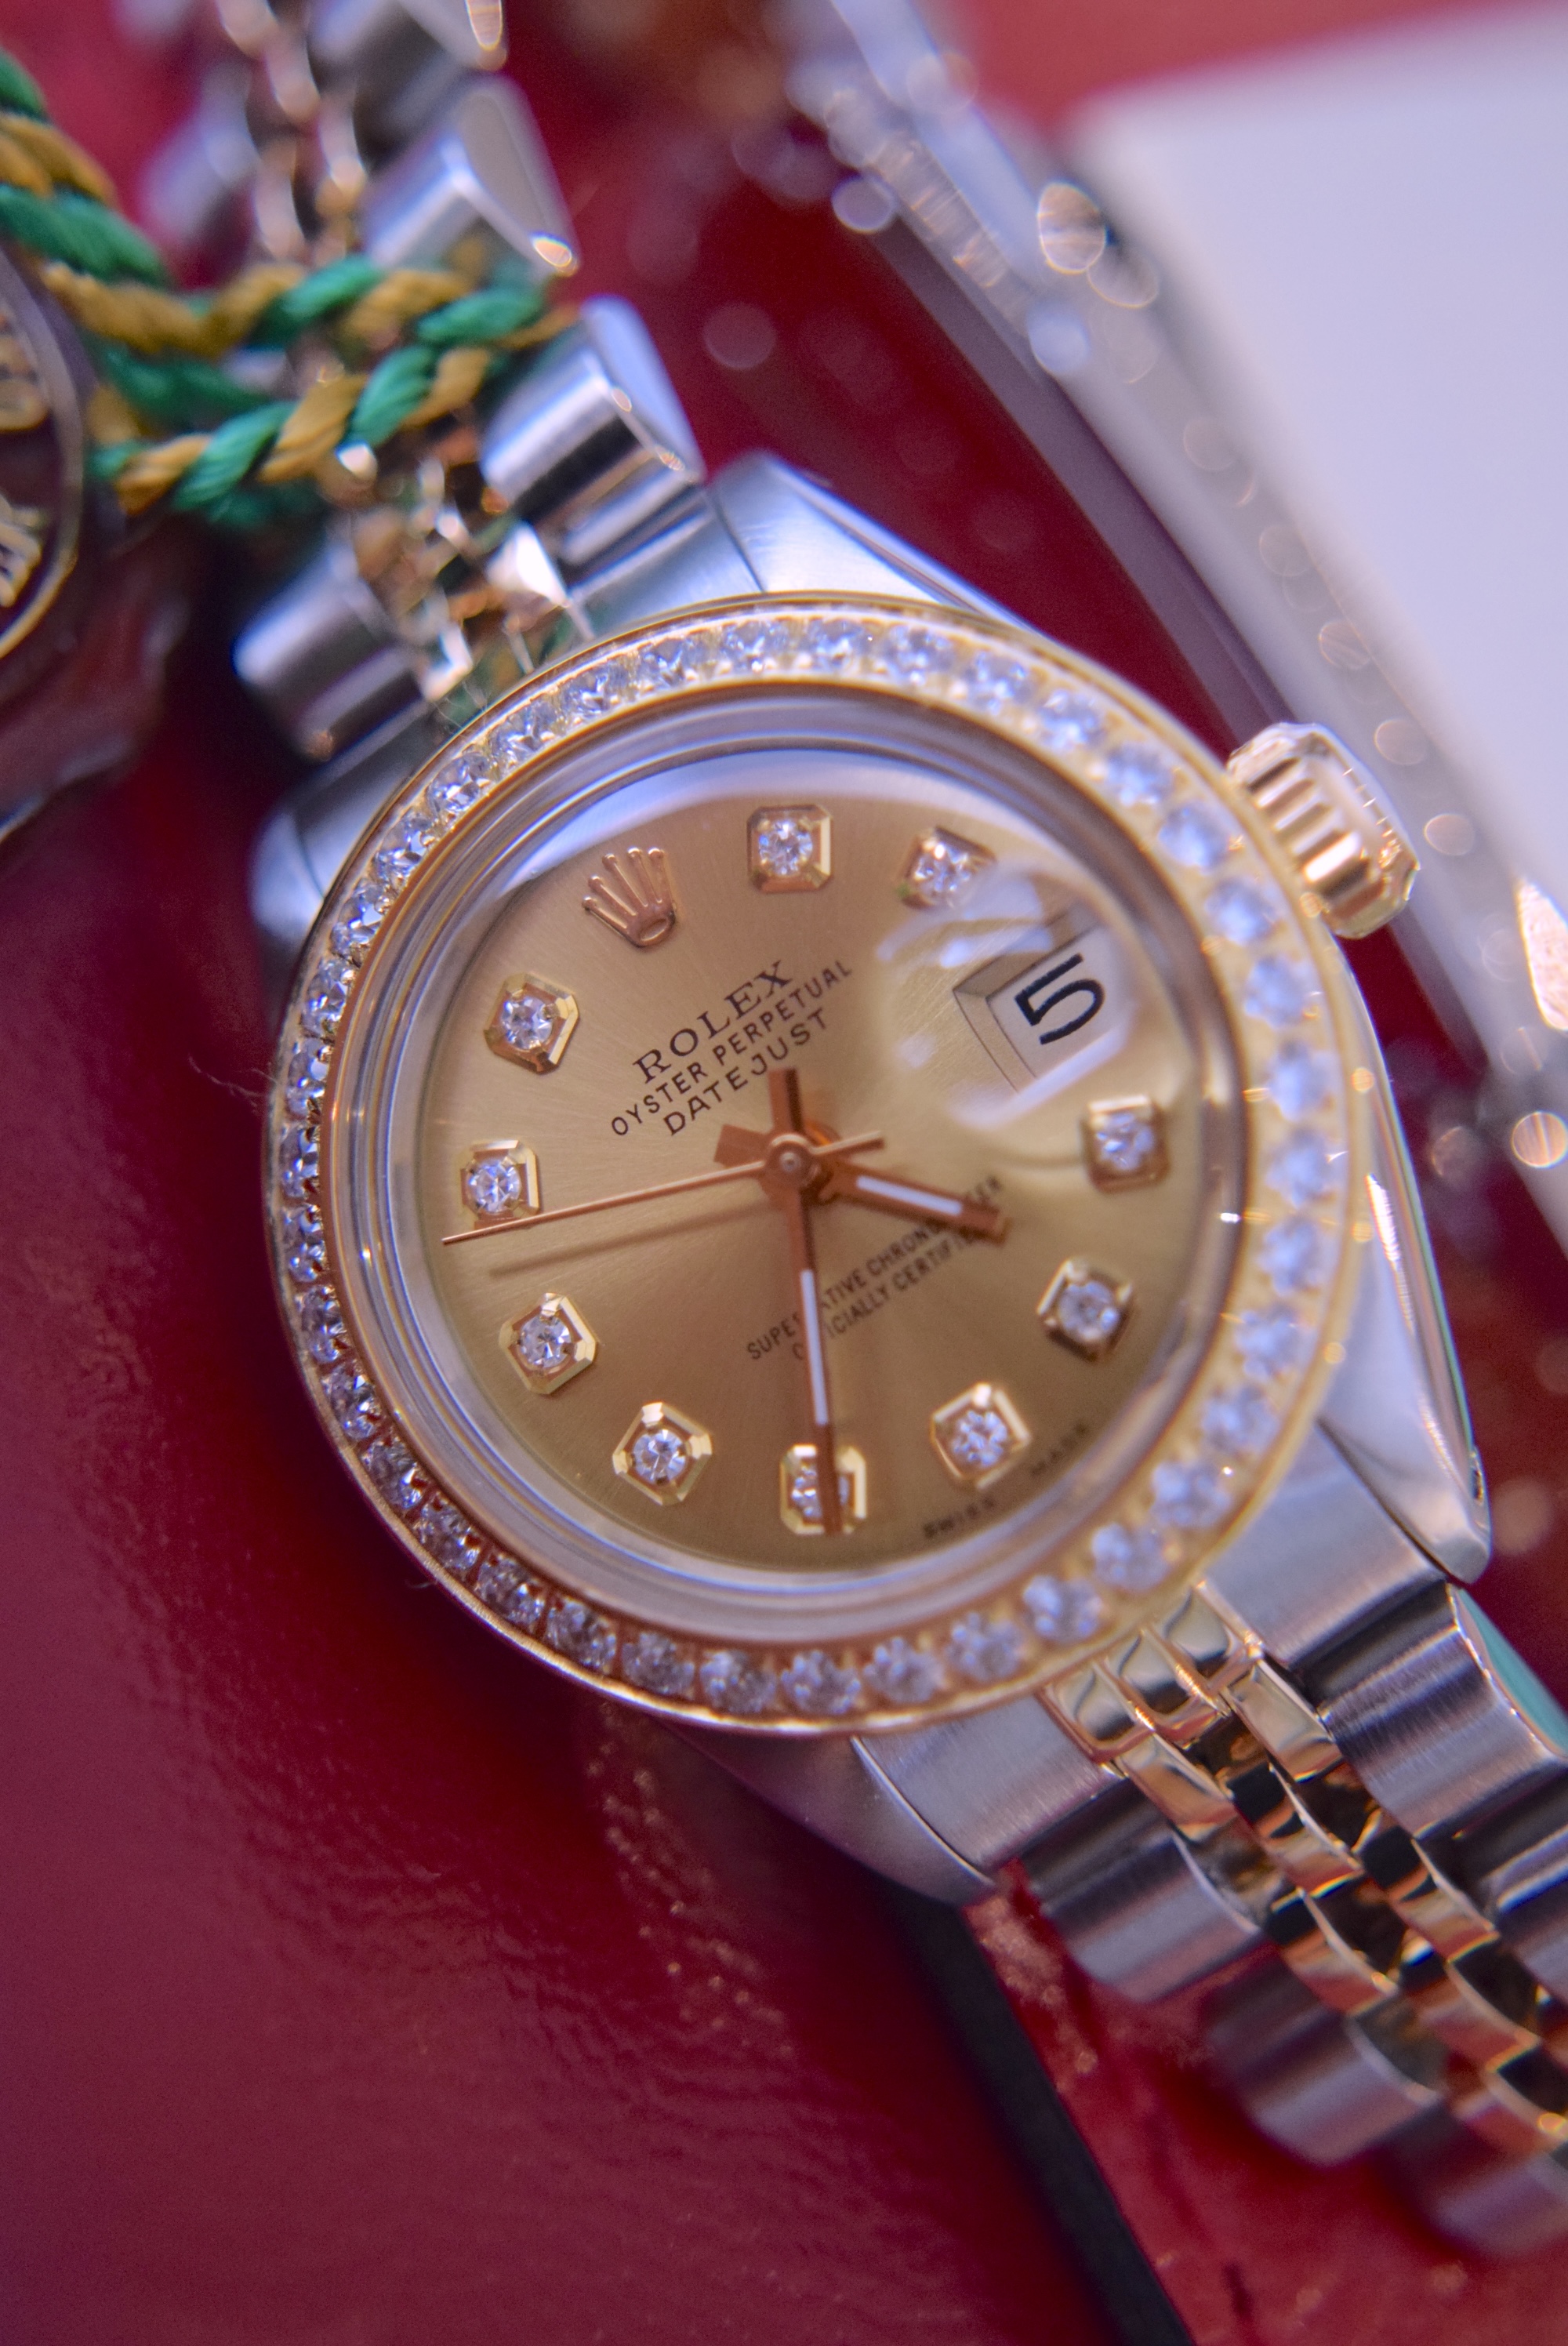 ROLEX 18CT YELLOW GOLD/ STEEL DATEJUST REF. 6917 - CUSTOM CHAMPAGNE DIAL/ BEZEL - Image 5 of 24